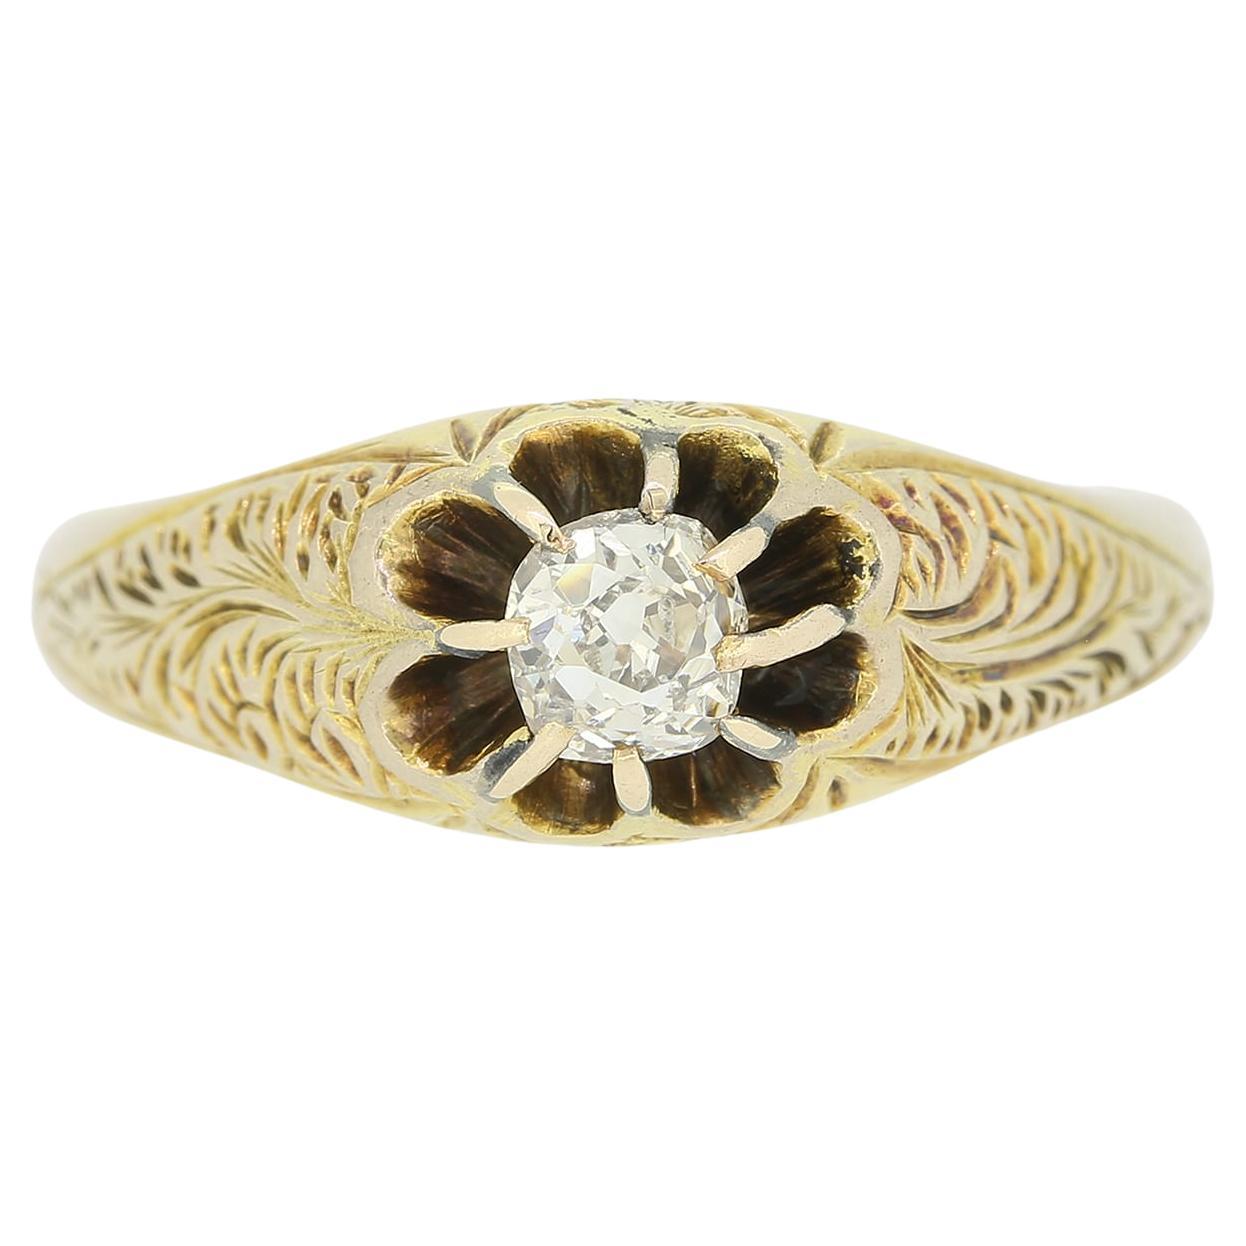 Victorian Patterned 0.33 Carat Diamond Gypsy Ring For Sale